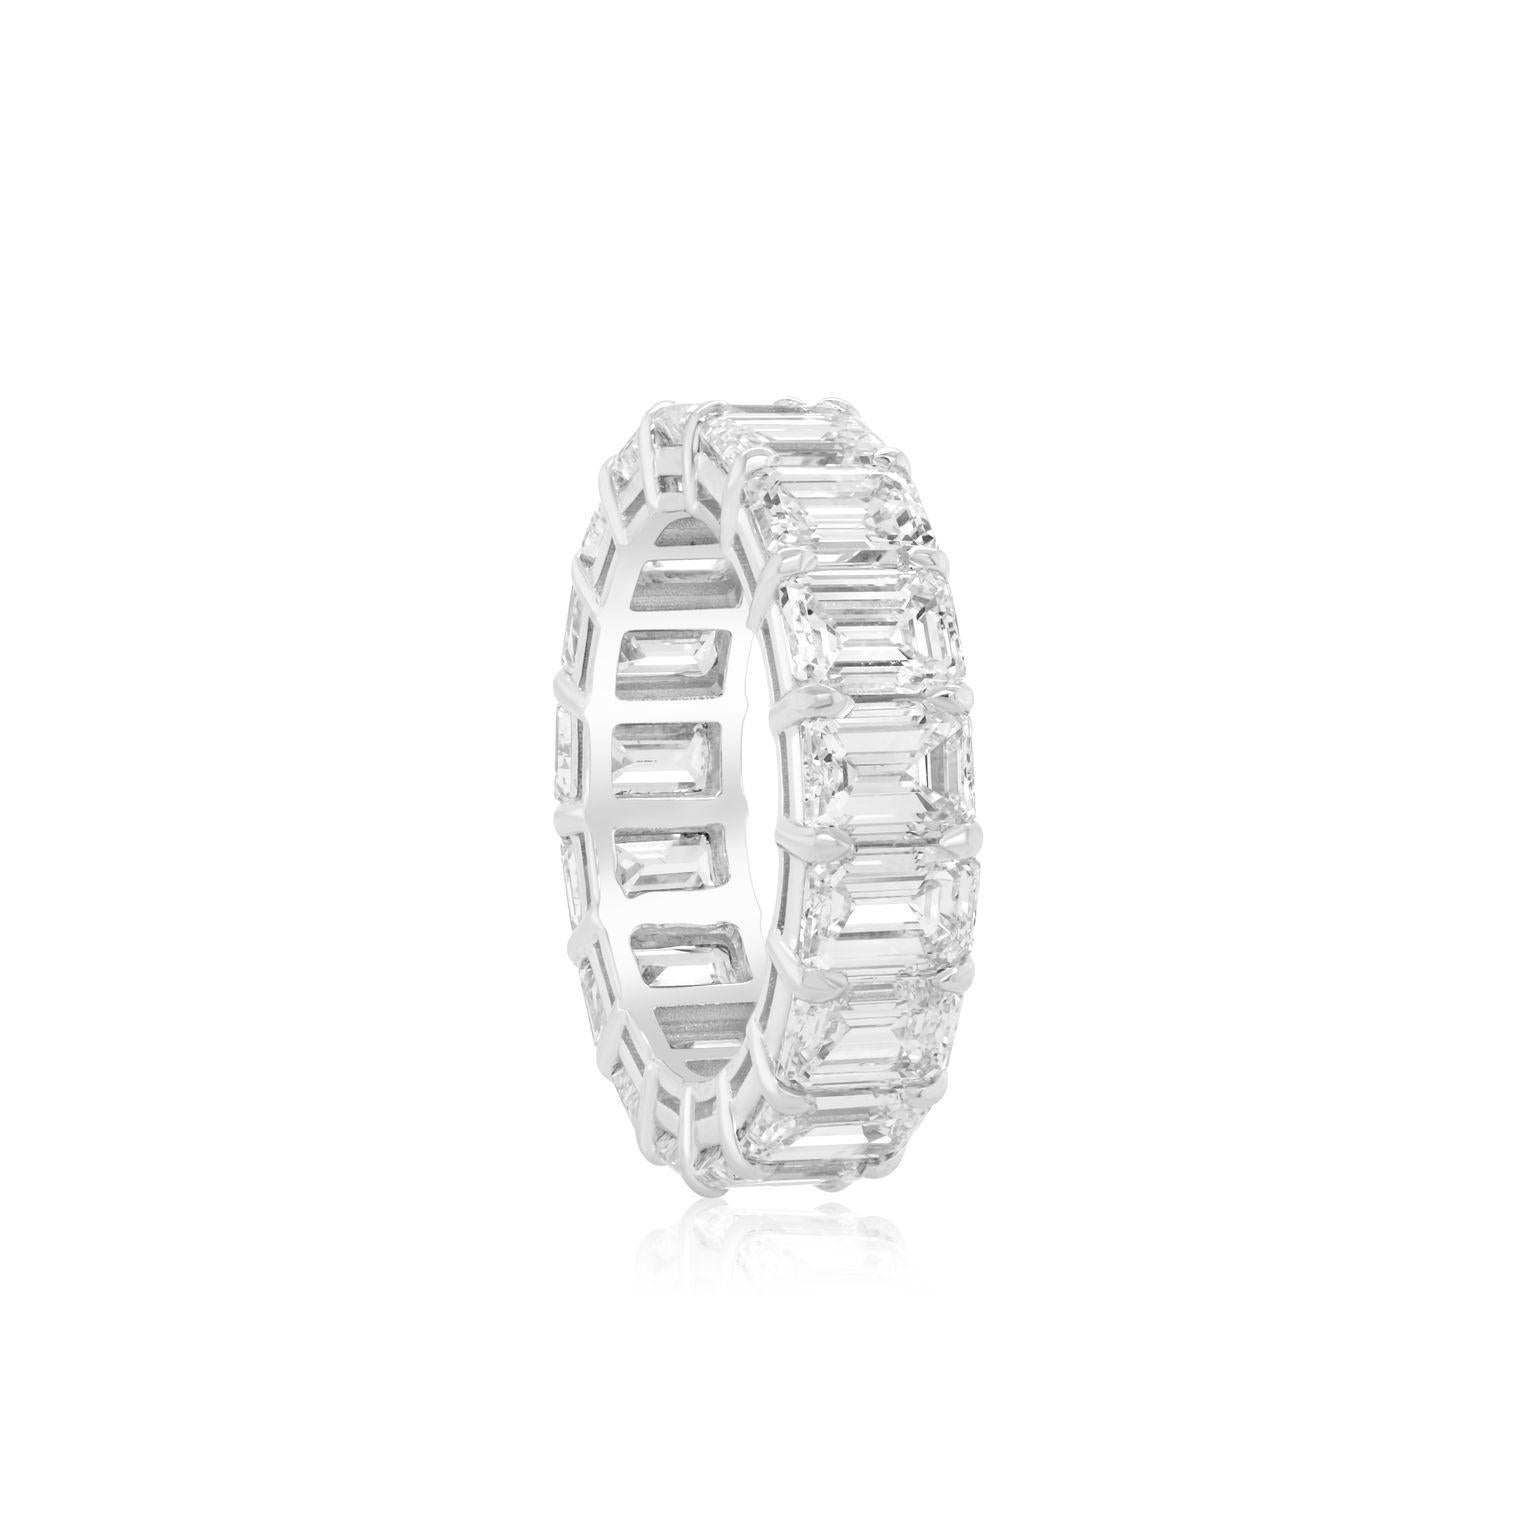 PLATINUM 17 EMERALD CUT DIAMONDS, TOTAL WEIGHING 8.74CTS D-E-F VVS-VS COLOR  GIA CERTIFICATES
Diana M. is a leading supplier of top-quality fine jewelry for over 35 years.
Diana M is one-stop shop for all your jewelry shopping, carrying line of